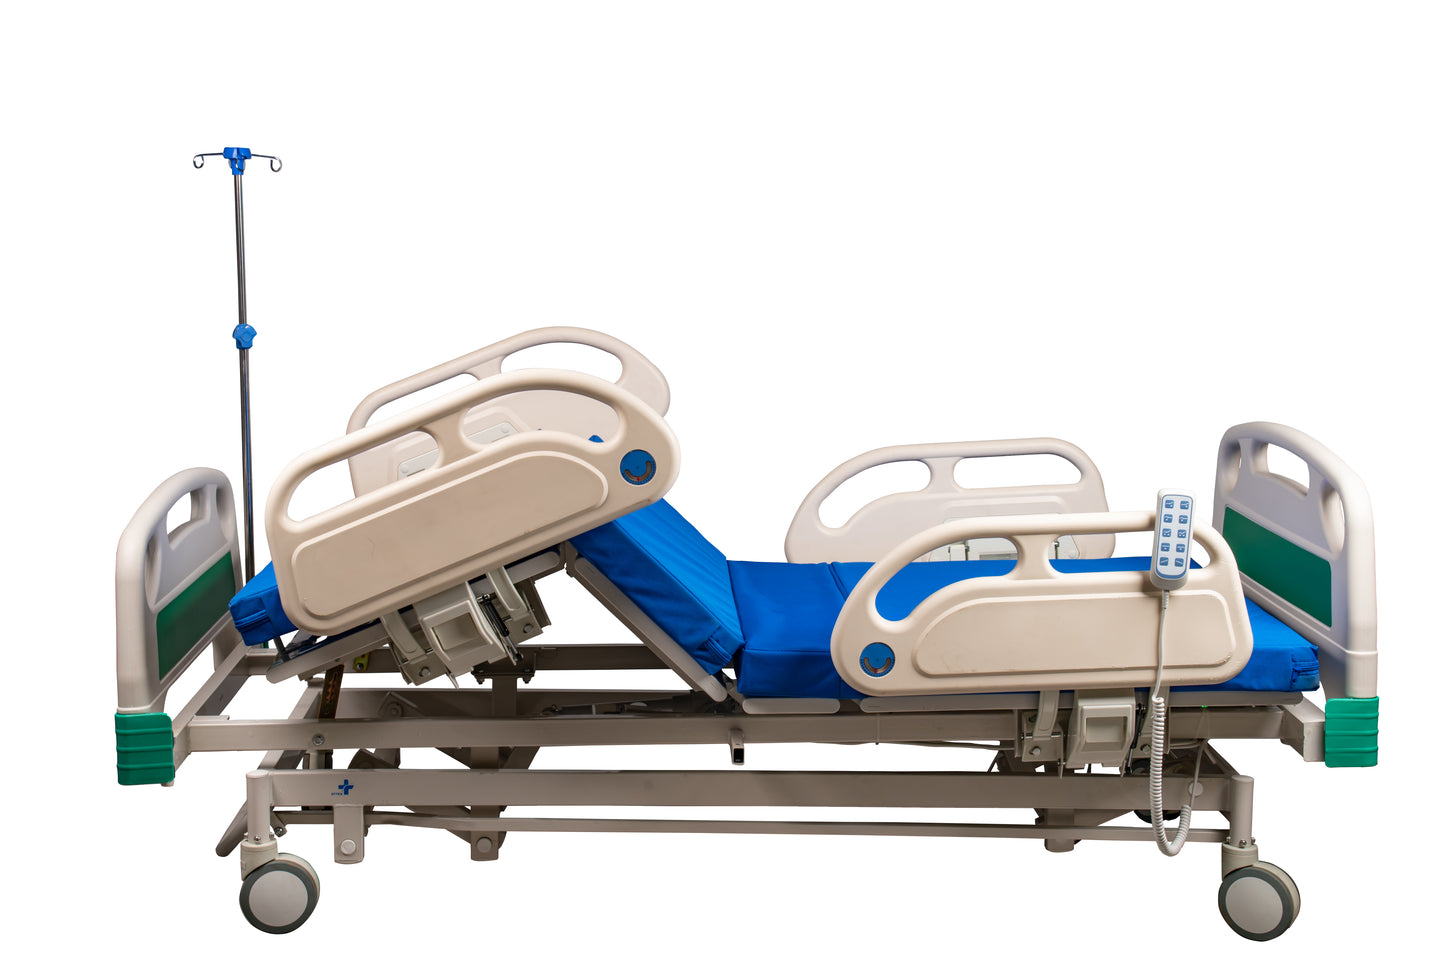 ARREX EXCELSIOR HOSPITAL BED - 5 FUNCTIONS ELECTRONIC BED, REMOTE ADJUSTMENT, INCLUDES MATTRESS, HEAVY-DUTY CASTORS WITH BRAKES